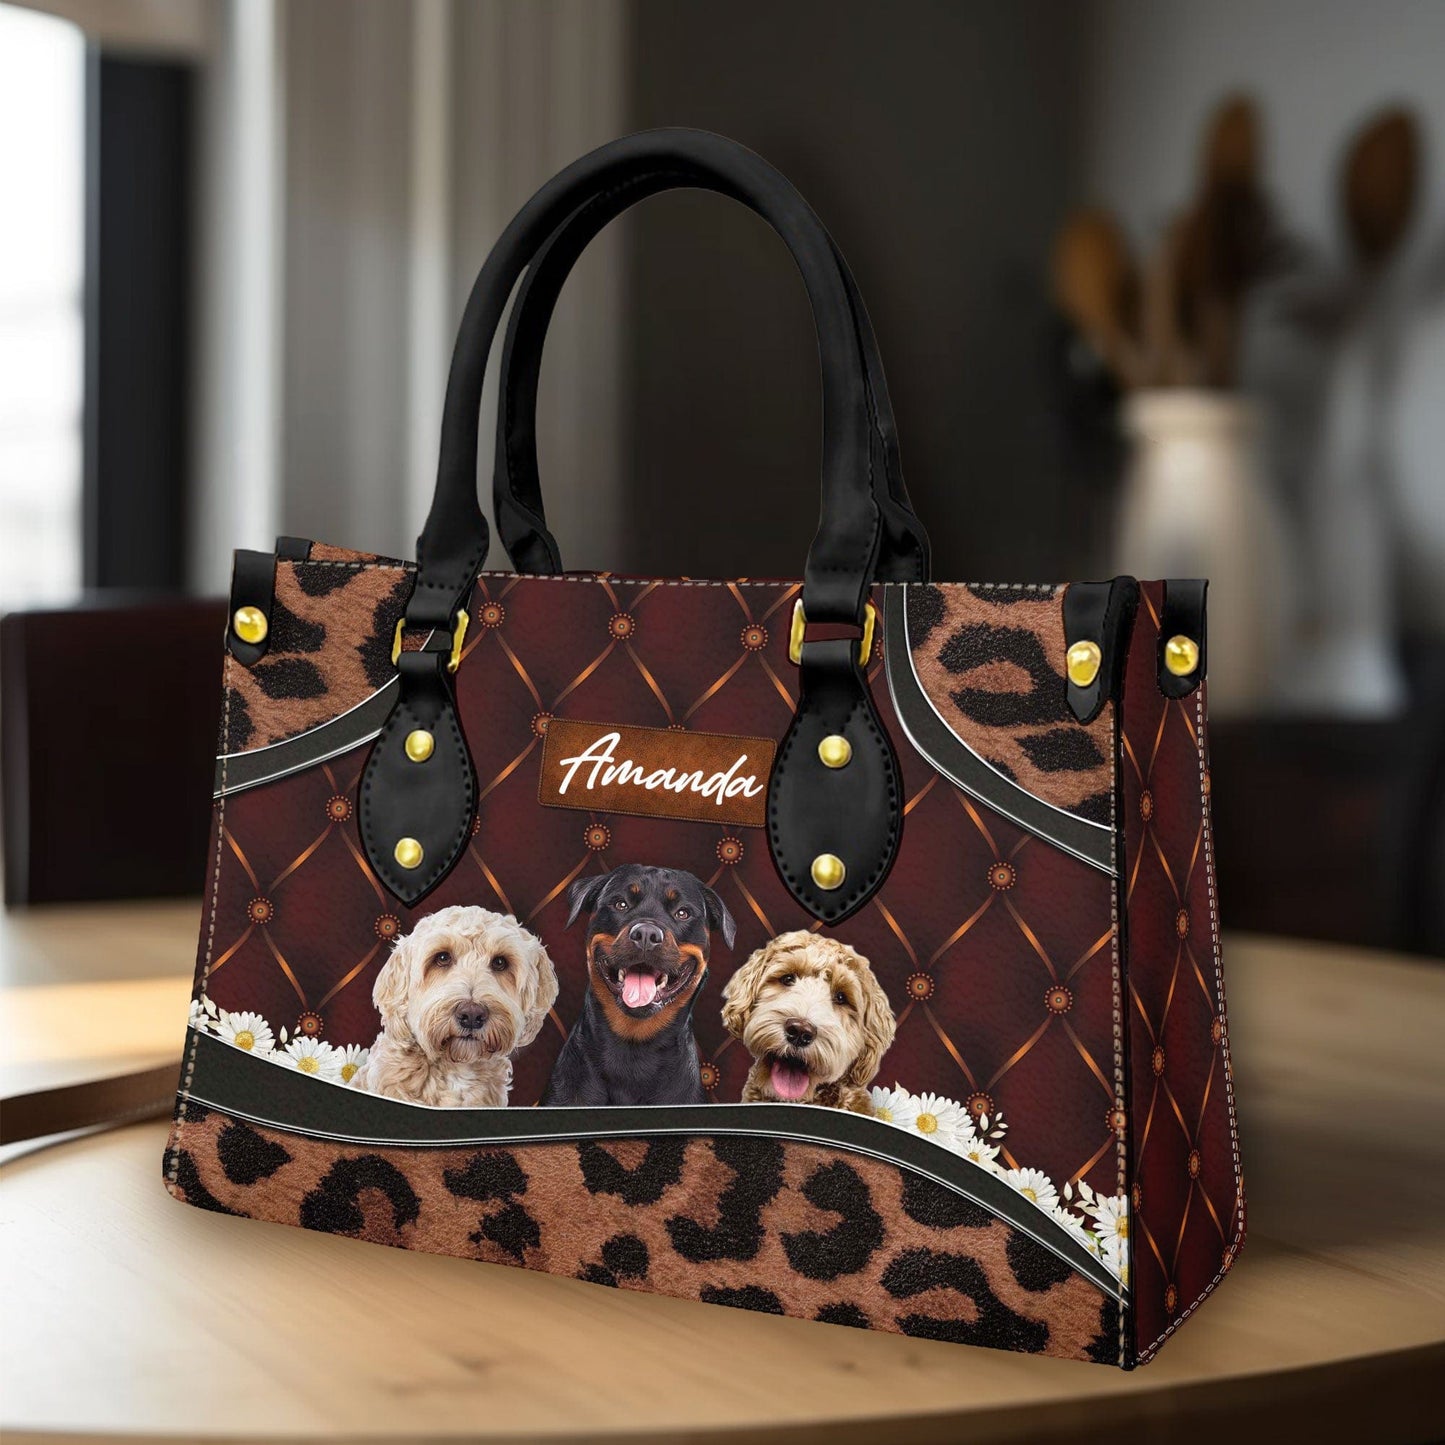 Custom Leather HandBag With Pet Photo | Gift For Pet Mom | Brown Upholstery Daisy & Leopard Style Mahogany Color